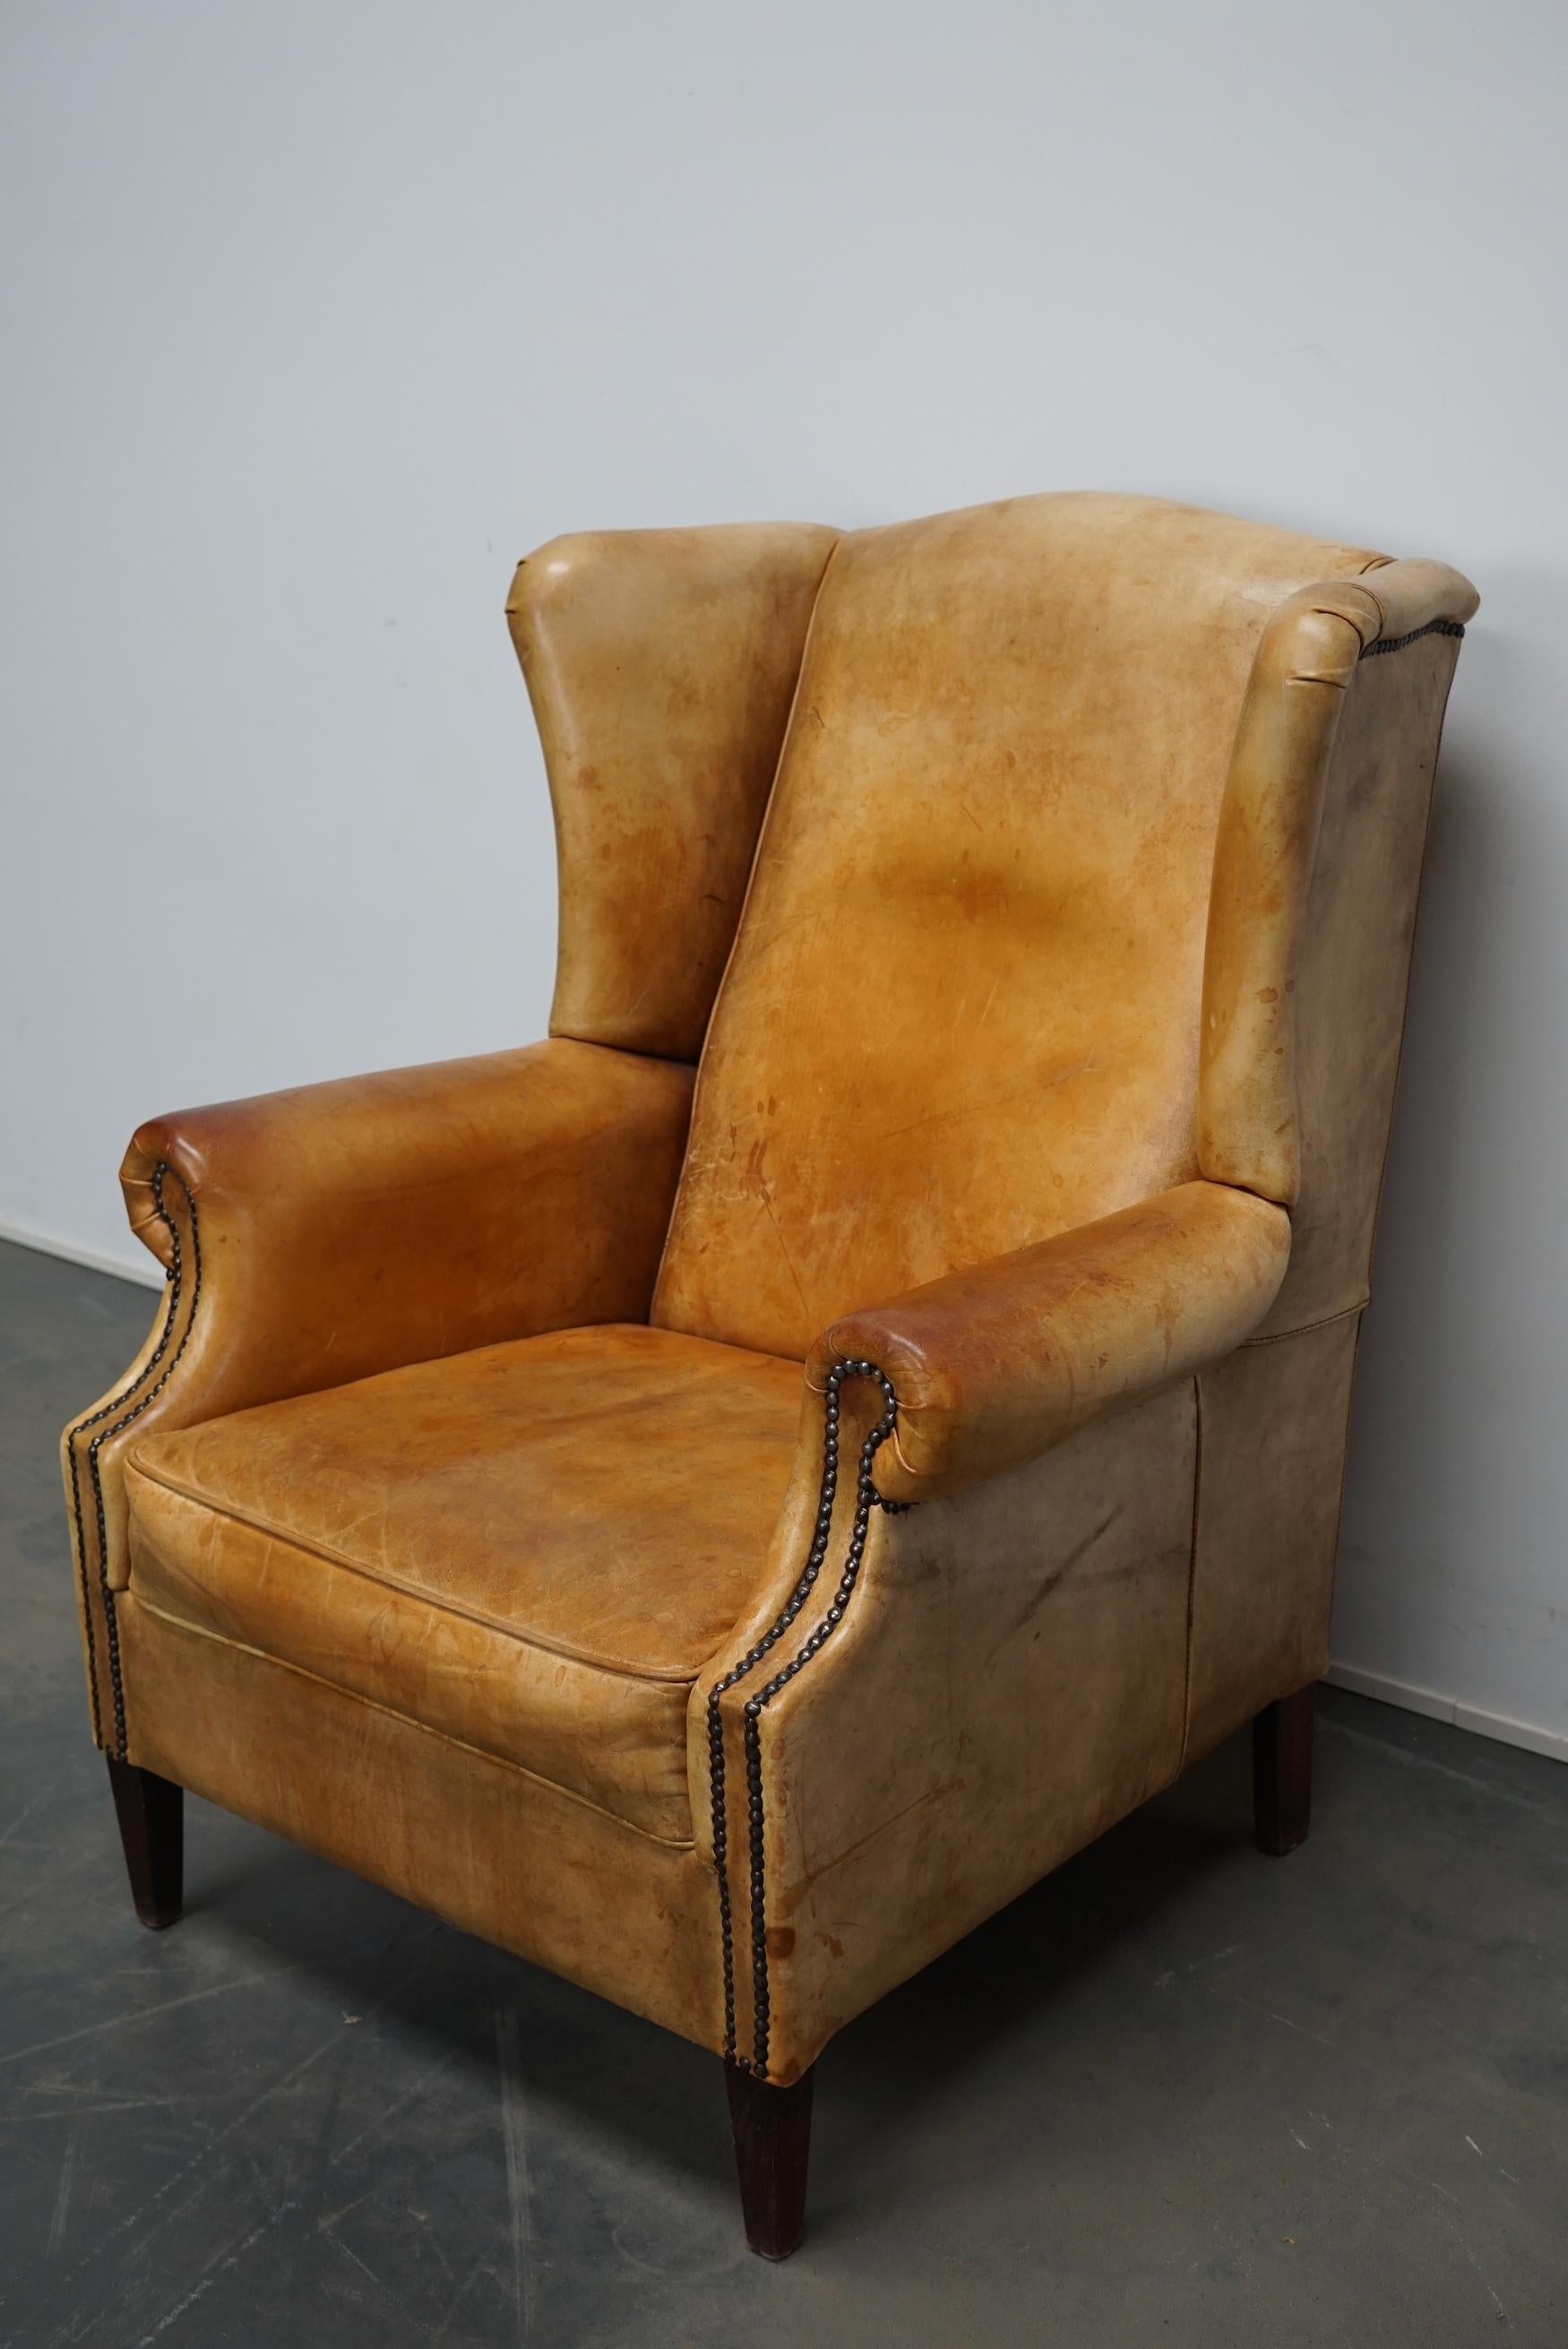 This vintage club chair is upholstered with cognac-colored leather and features metal rivets and wooden legs.